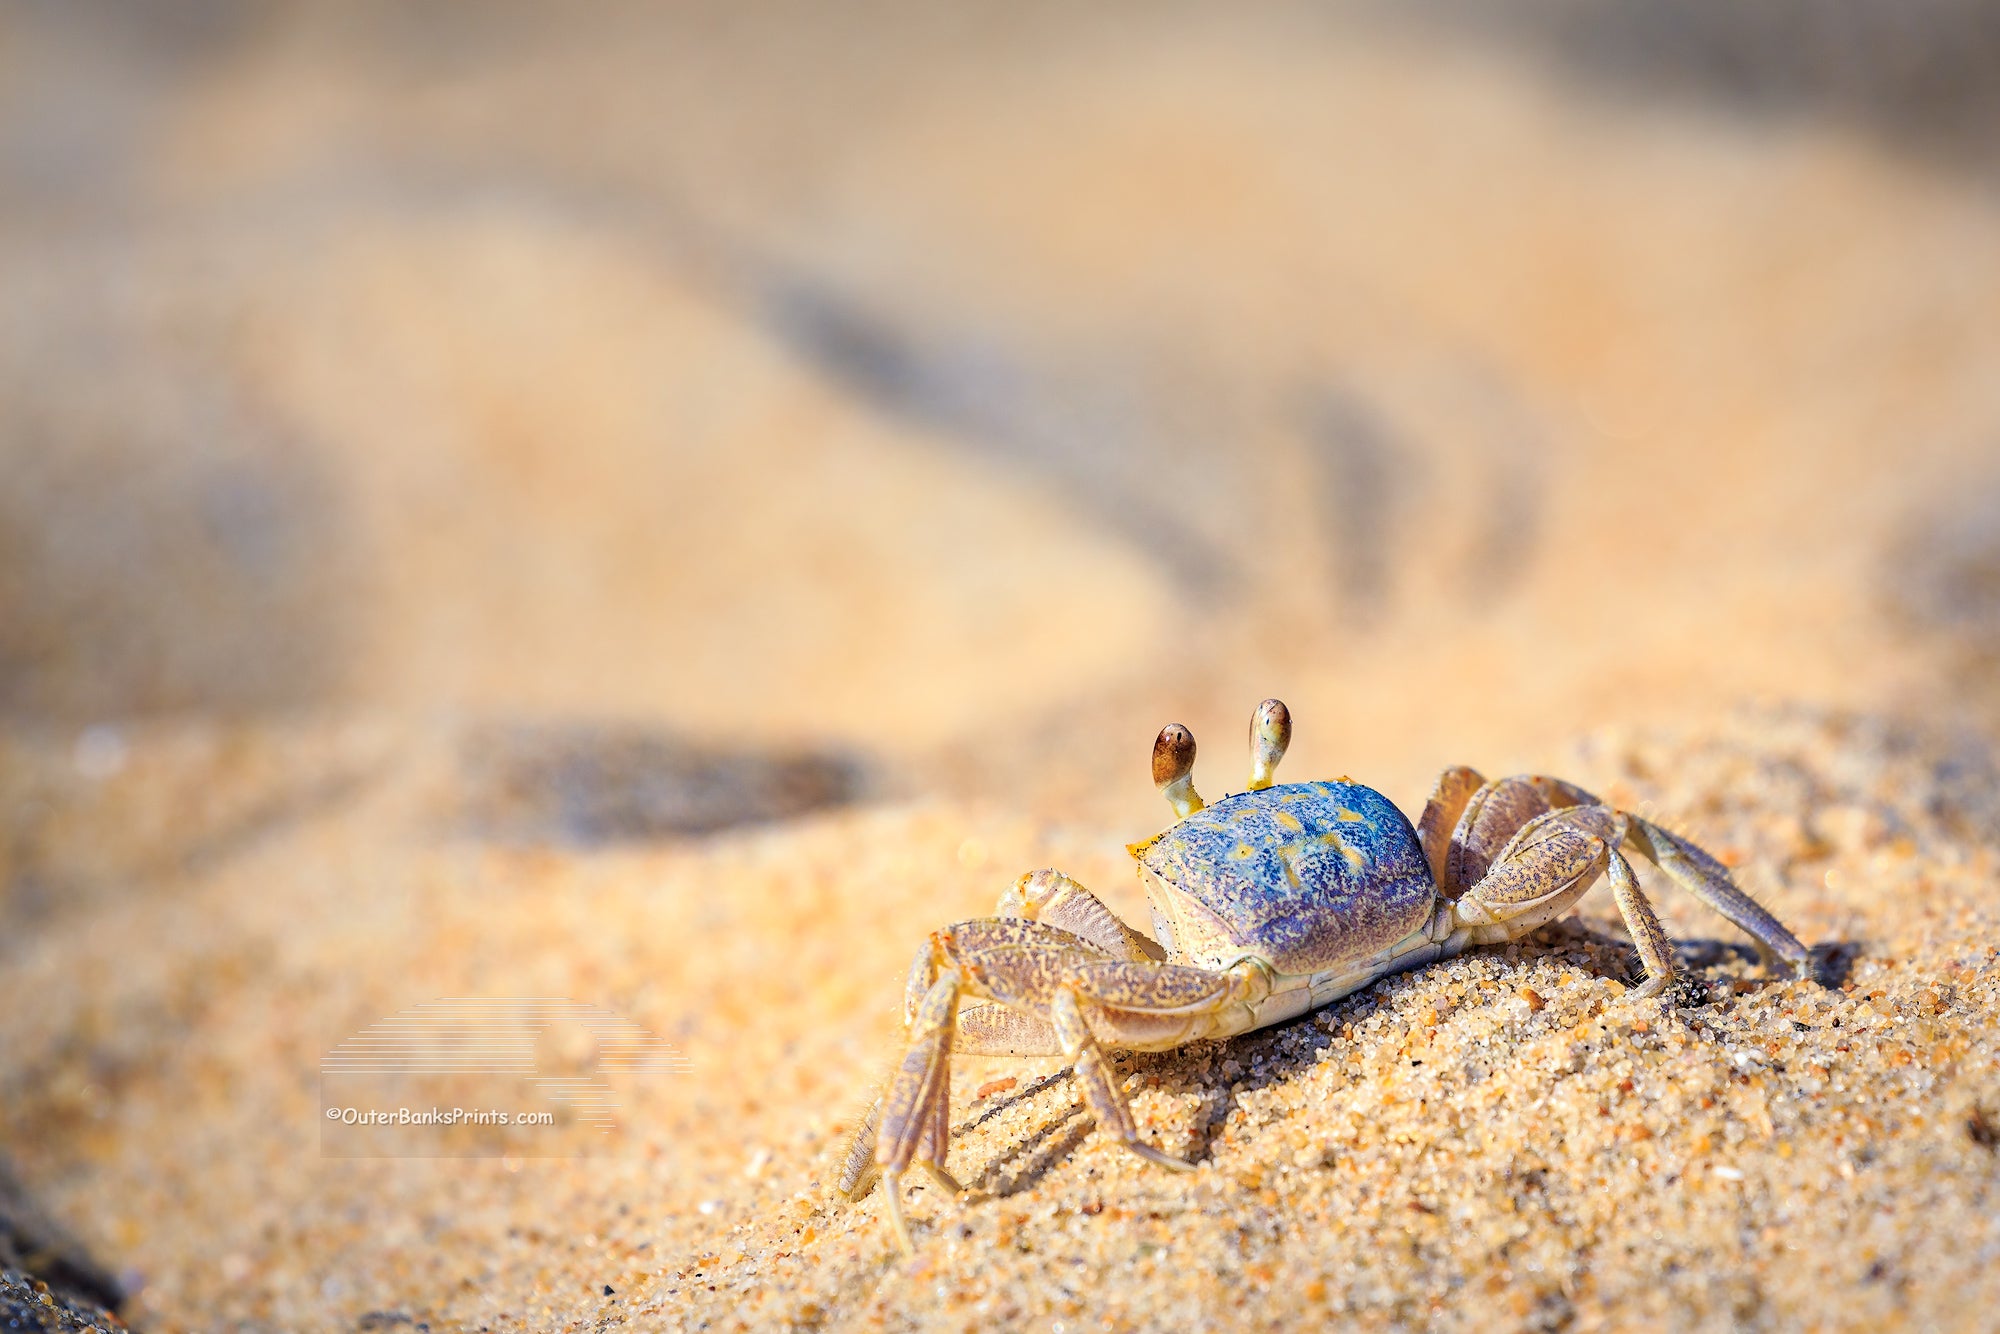 Sunbathing ghost crab on the sandy beaches of the Outer Banks, NC.